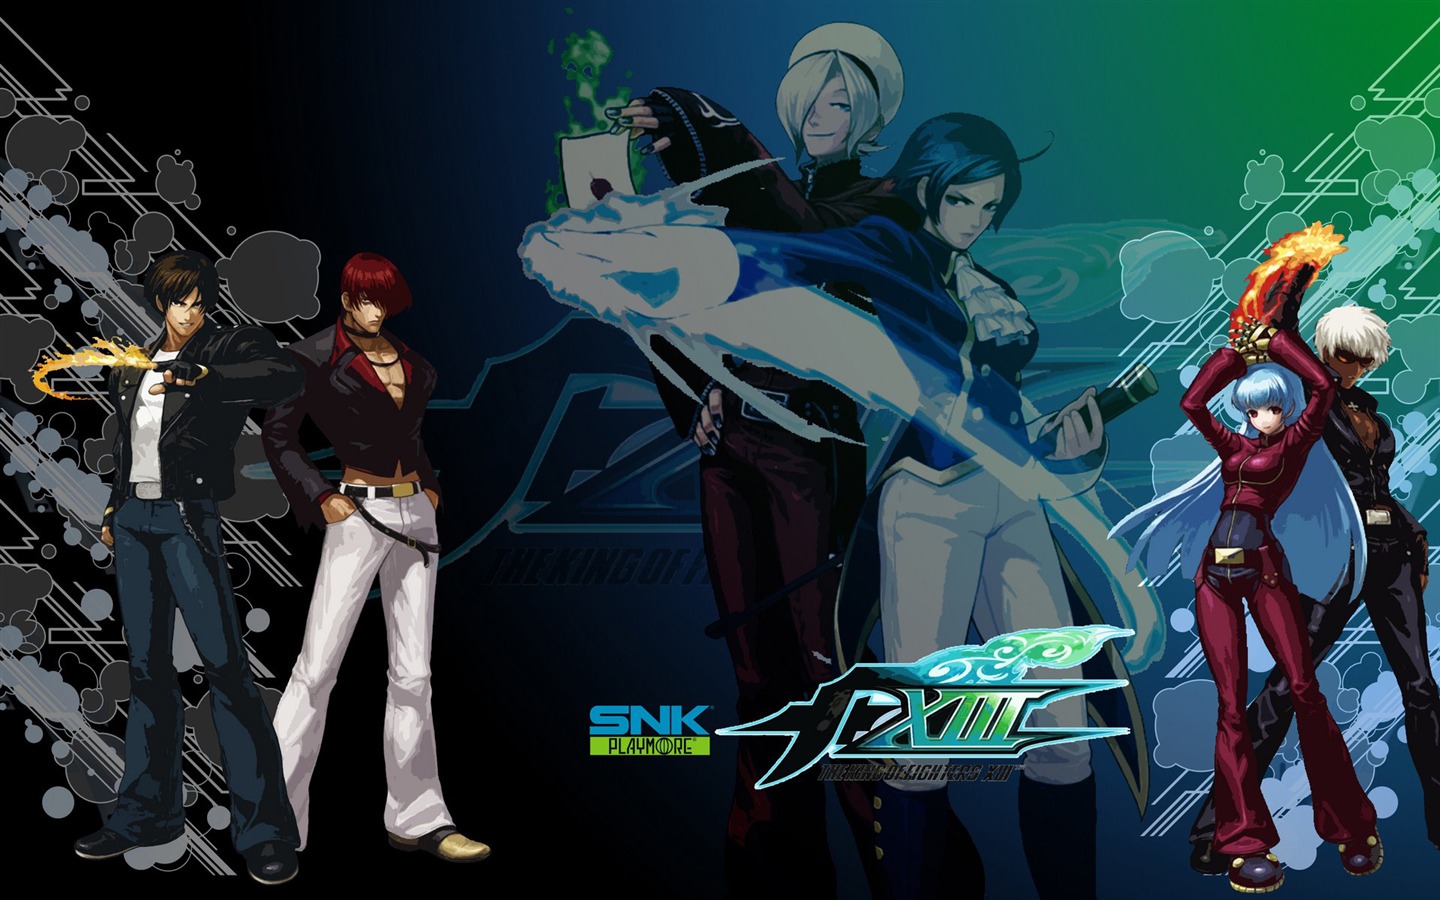 Le roi de wallpapers Fighters XIII #4 - 1440x900